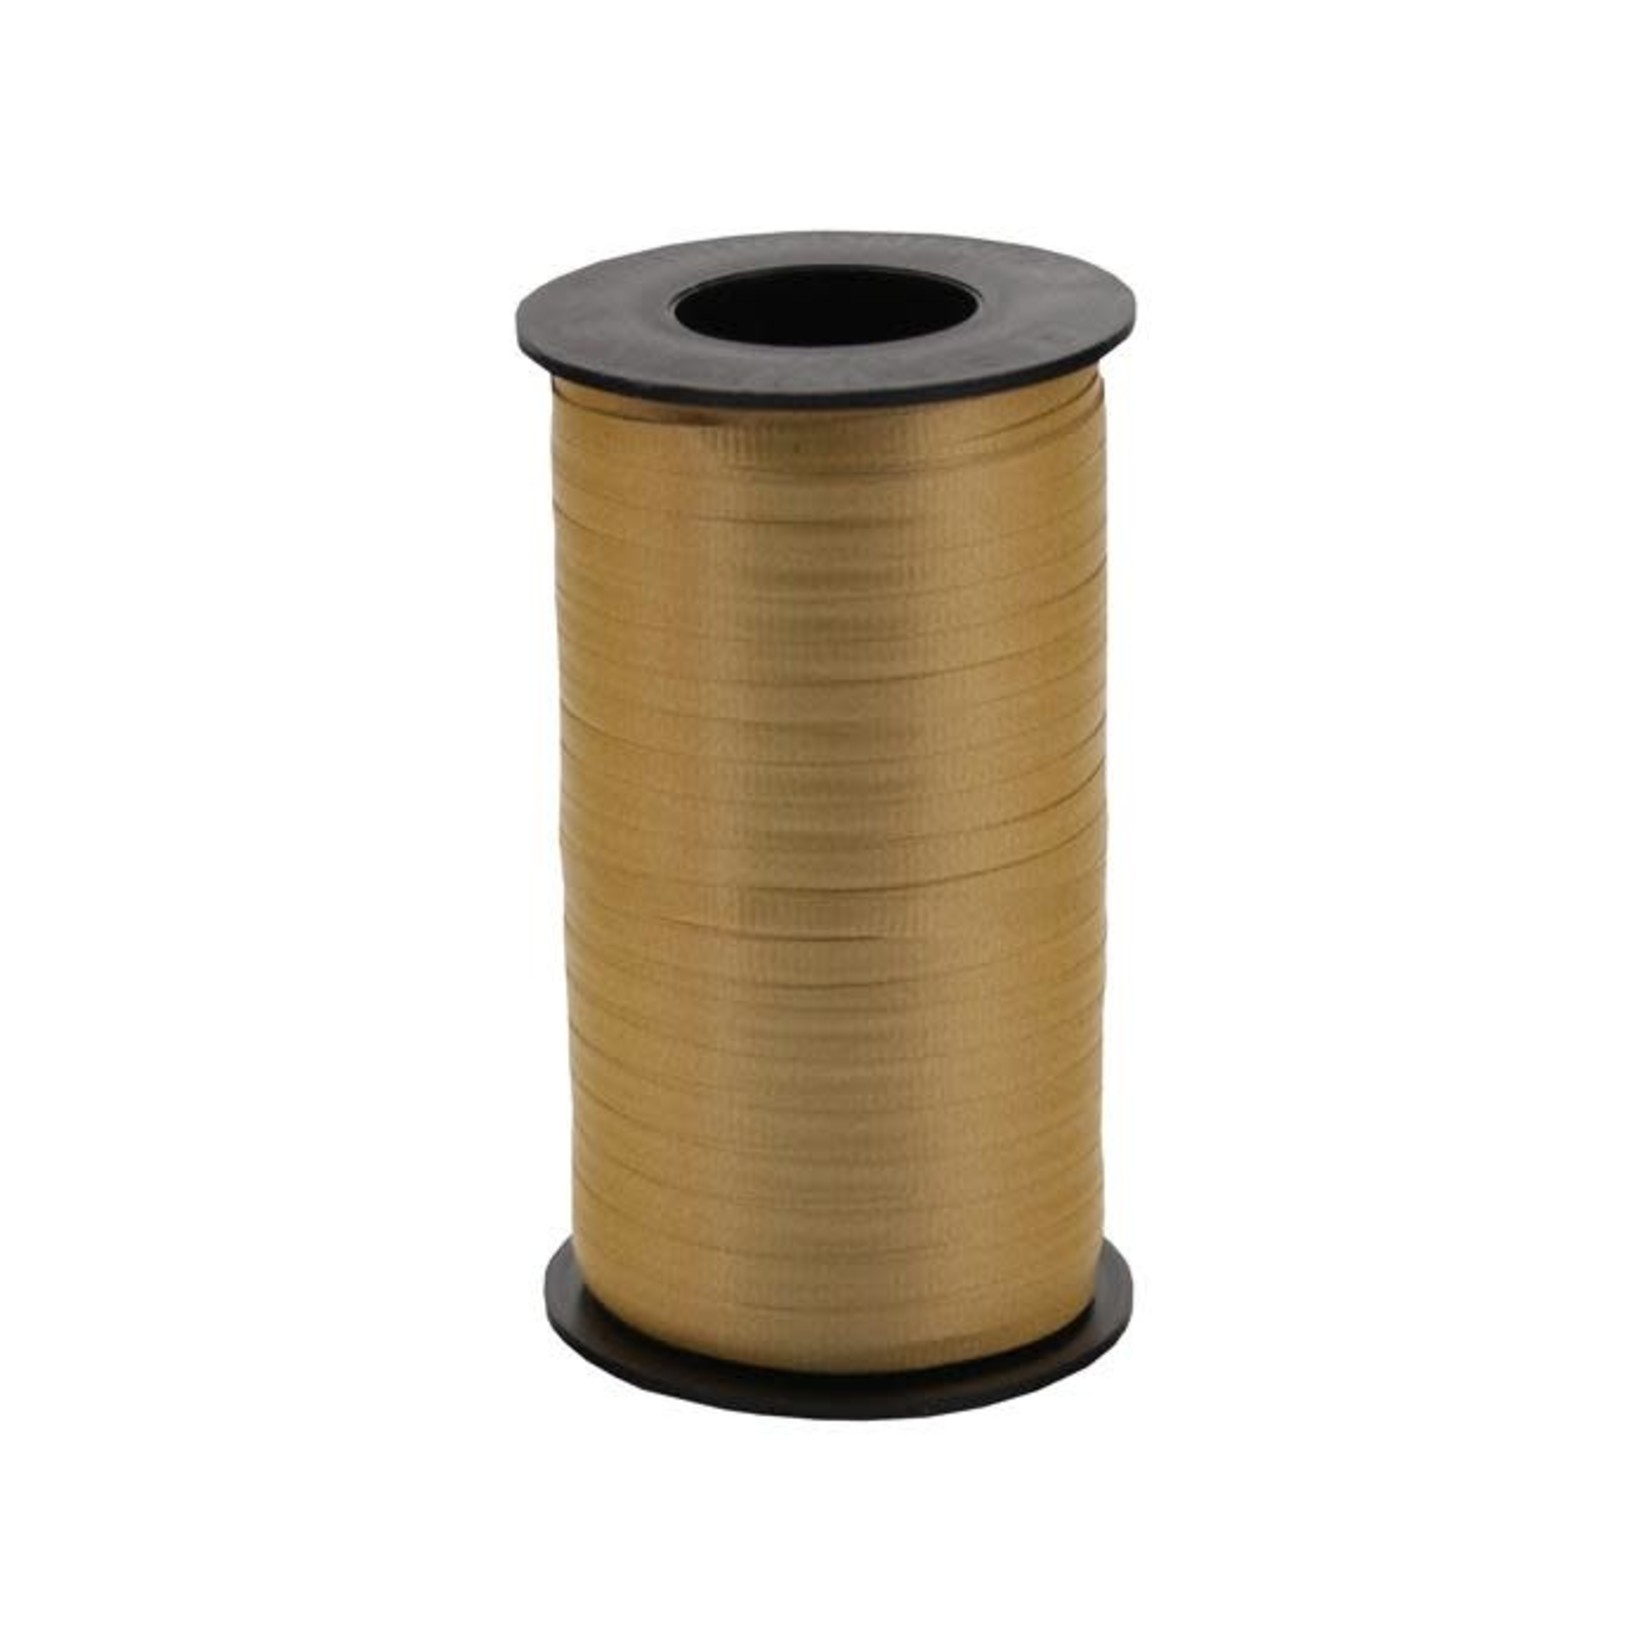 CURLING RIBBON HOLIDAY GOLD3/16 500 YD